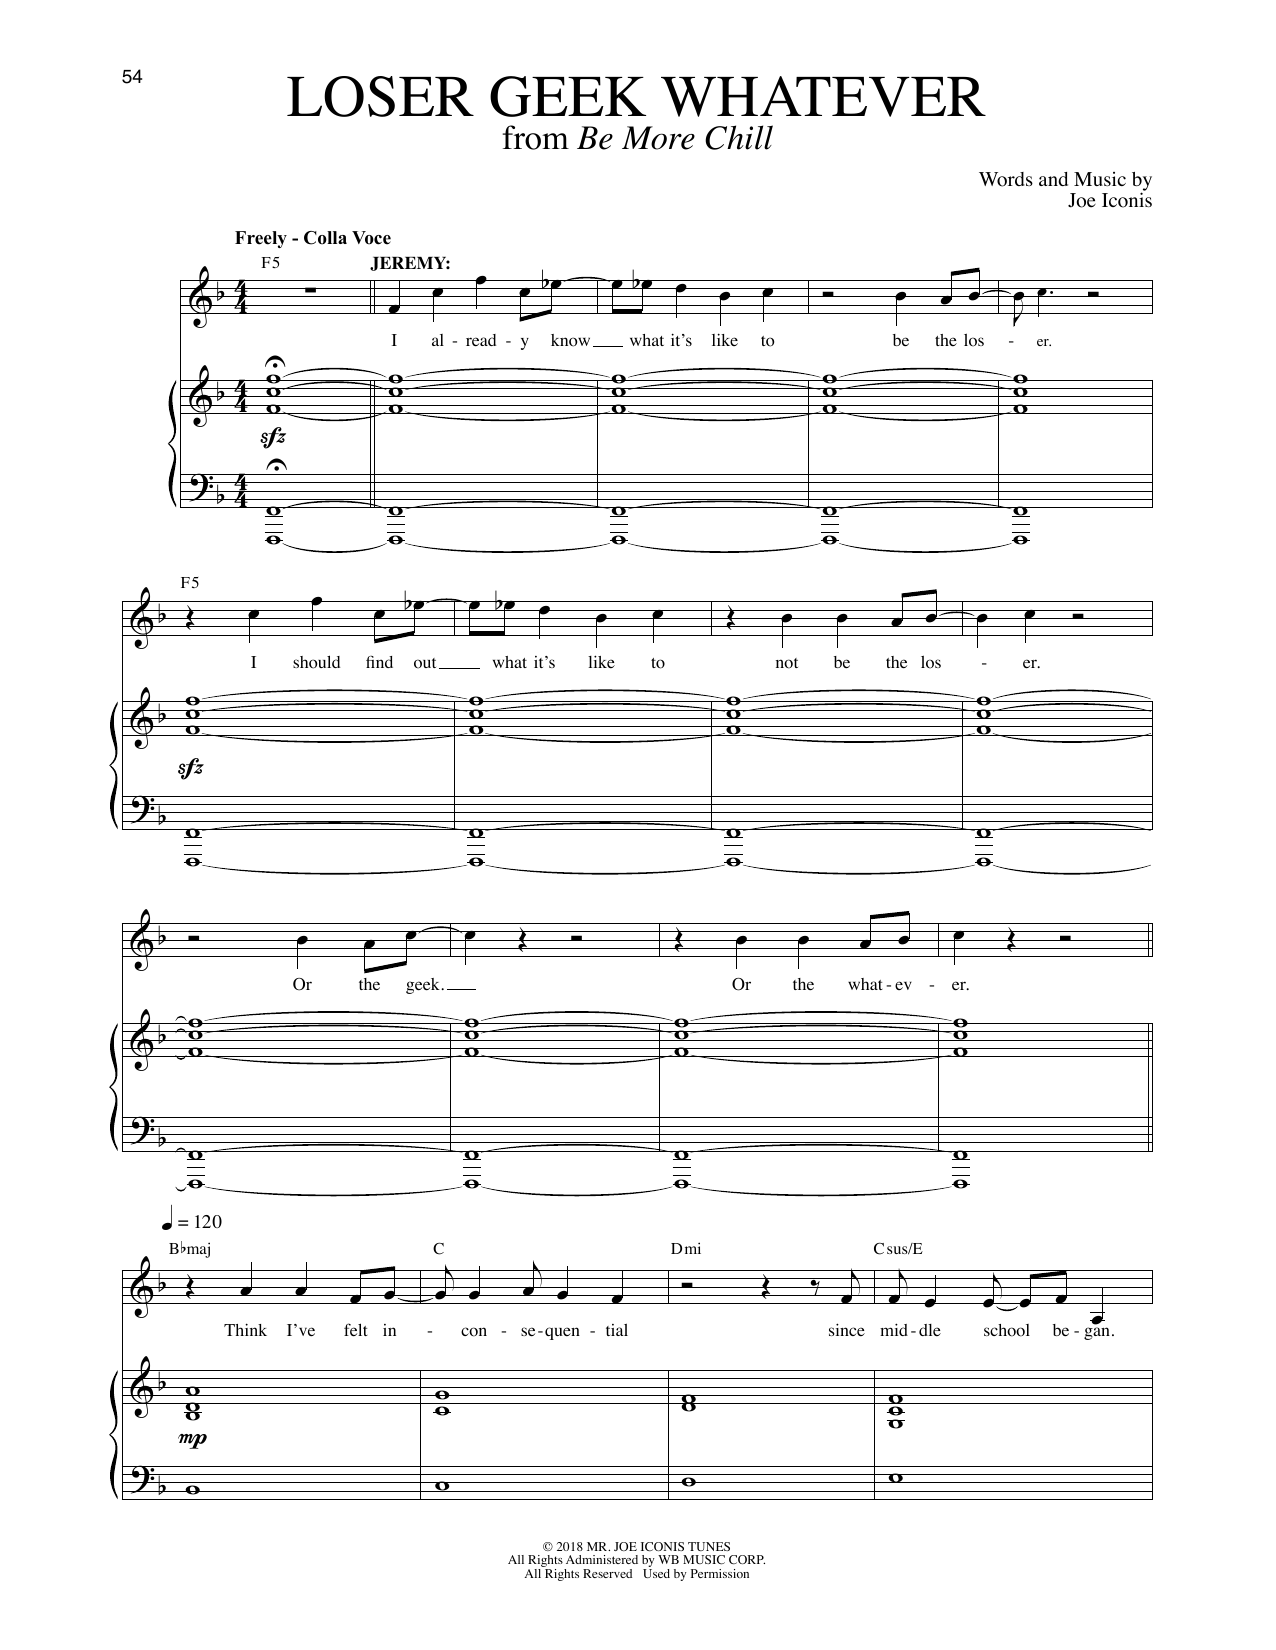 Download Joe Iconis Loser Geek Whatever (from Be More Chill Sheet Music